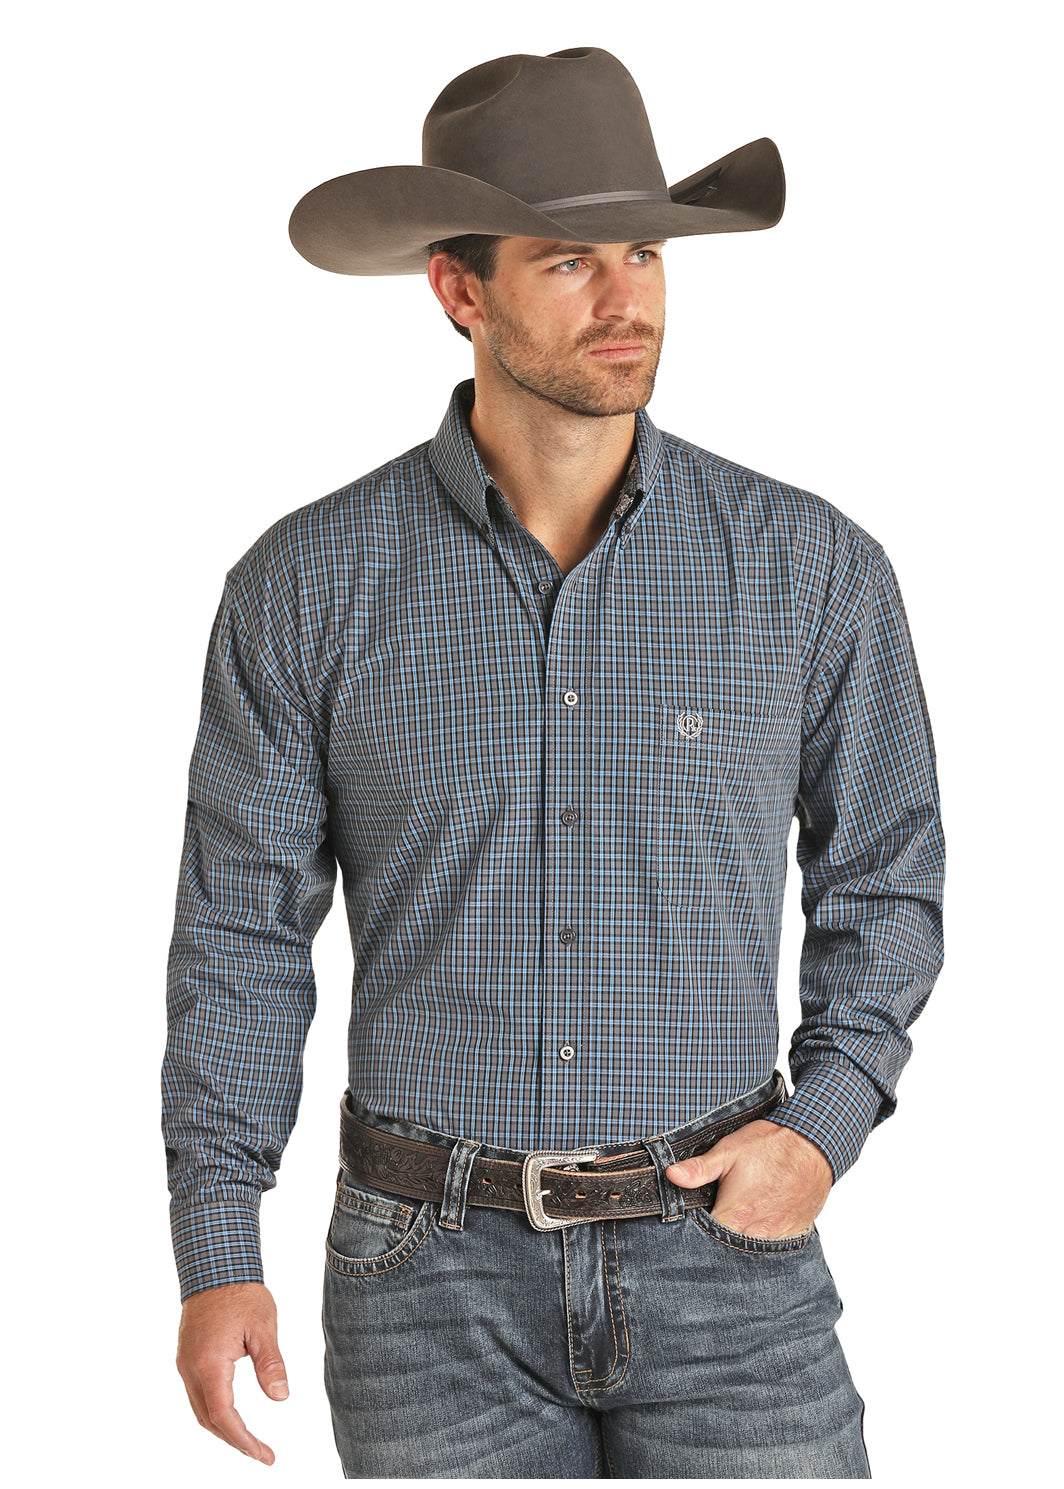 PANHANDLE MEN'S RELAXED FIT CHECK PRINT BUTTON DOWN SHIRT